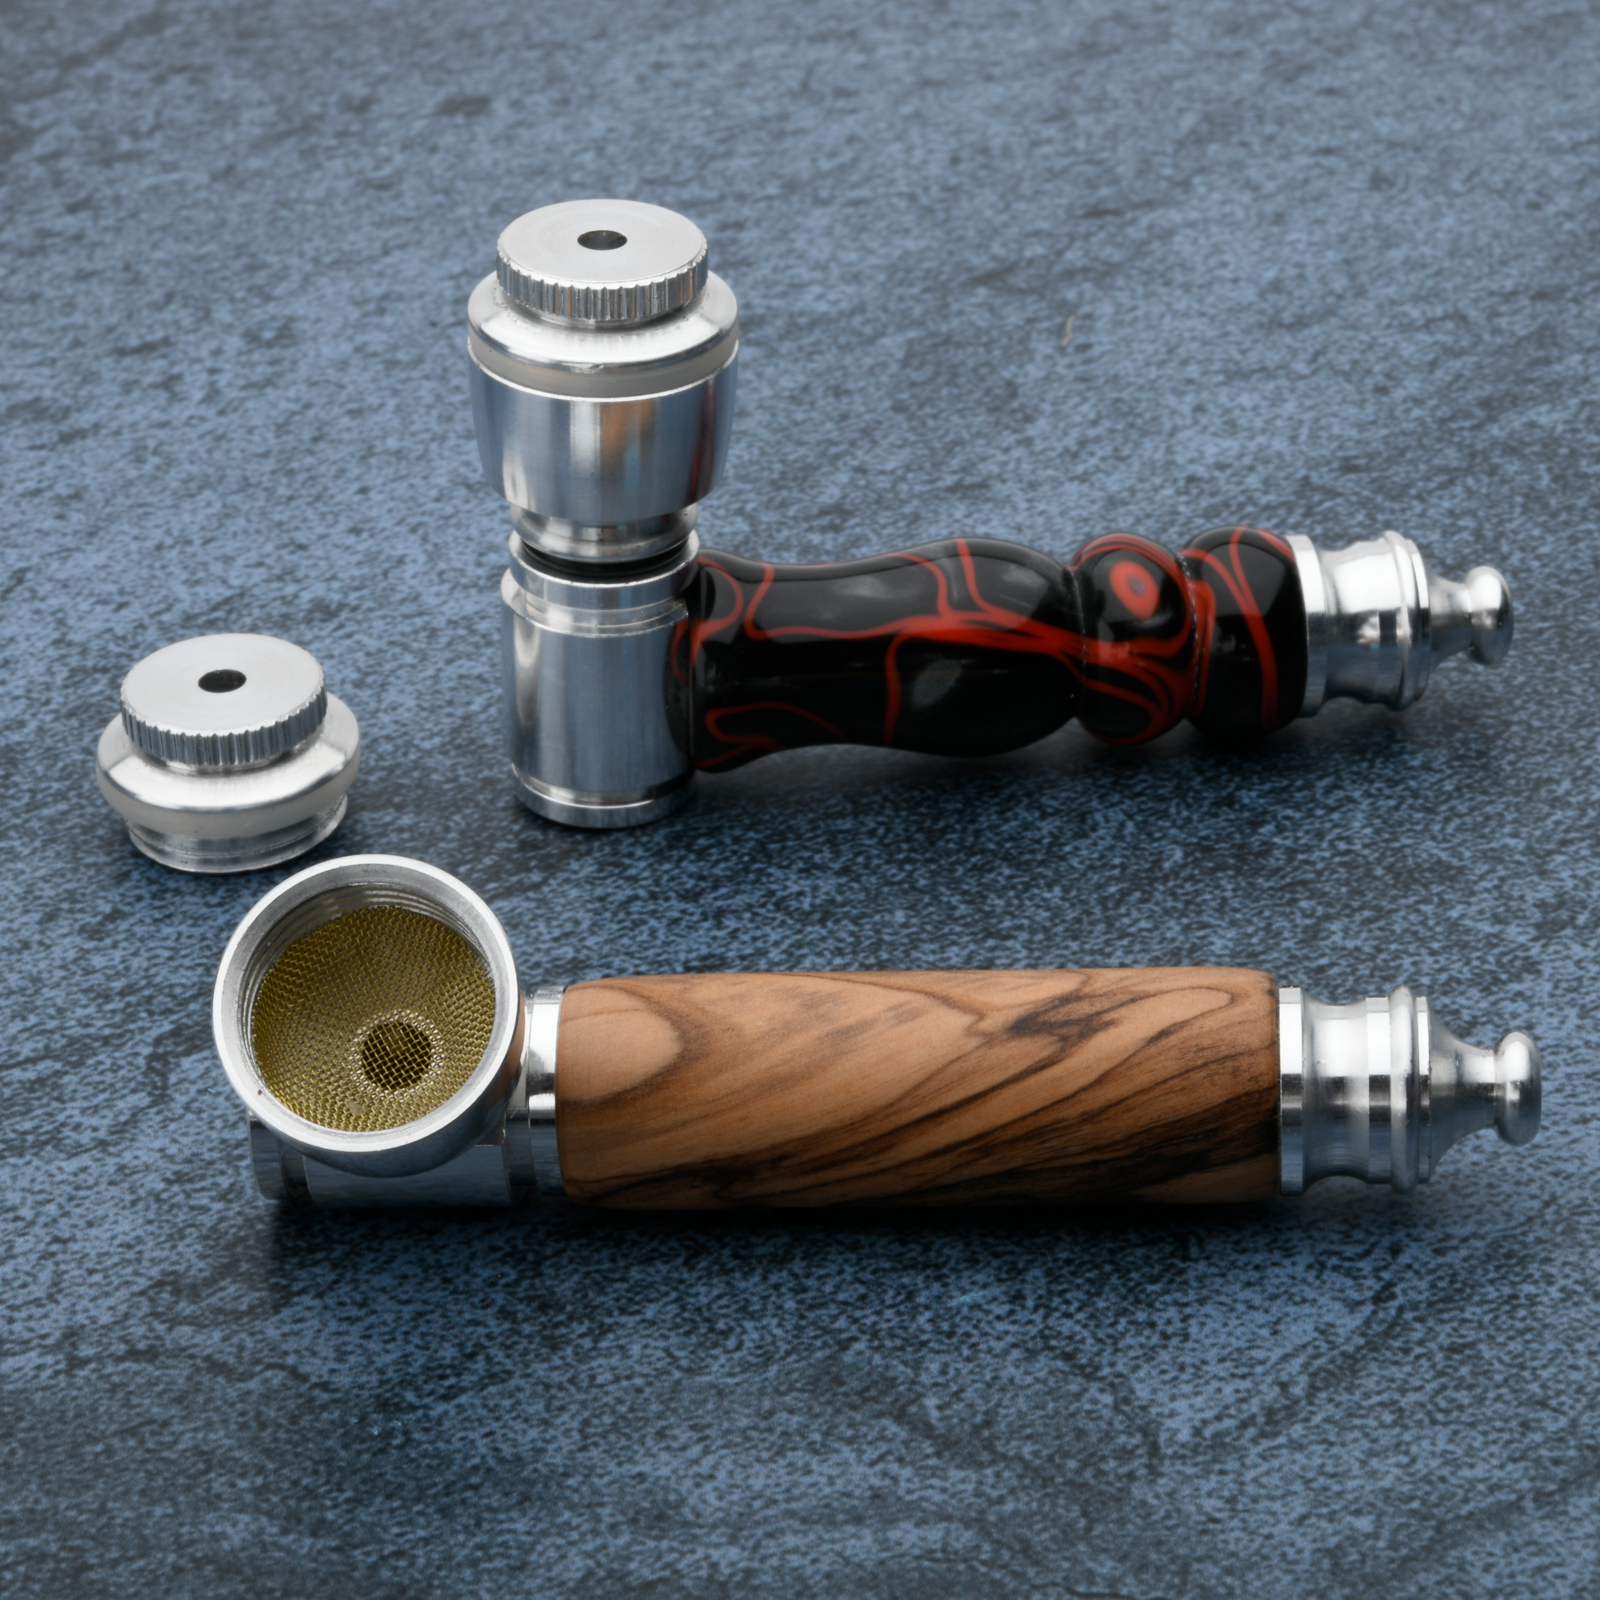 Brass Tobacco Pipe - Compact and Stylish